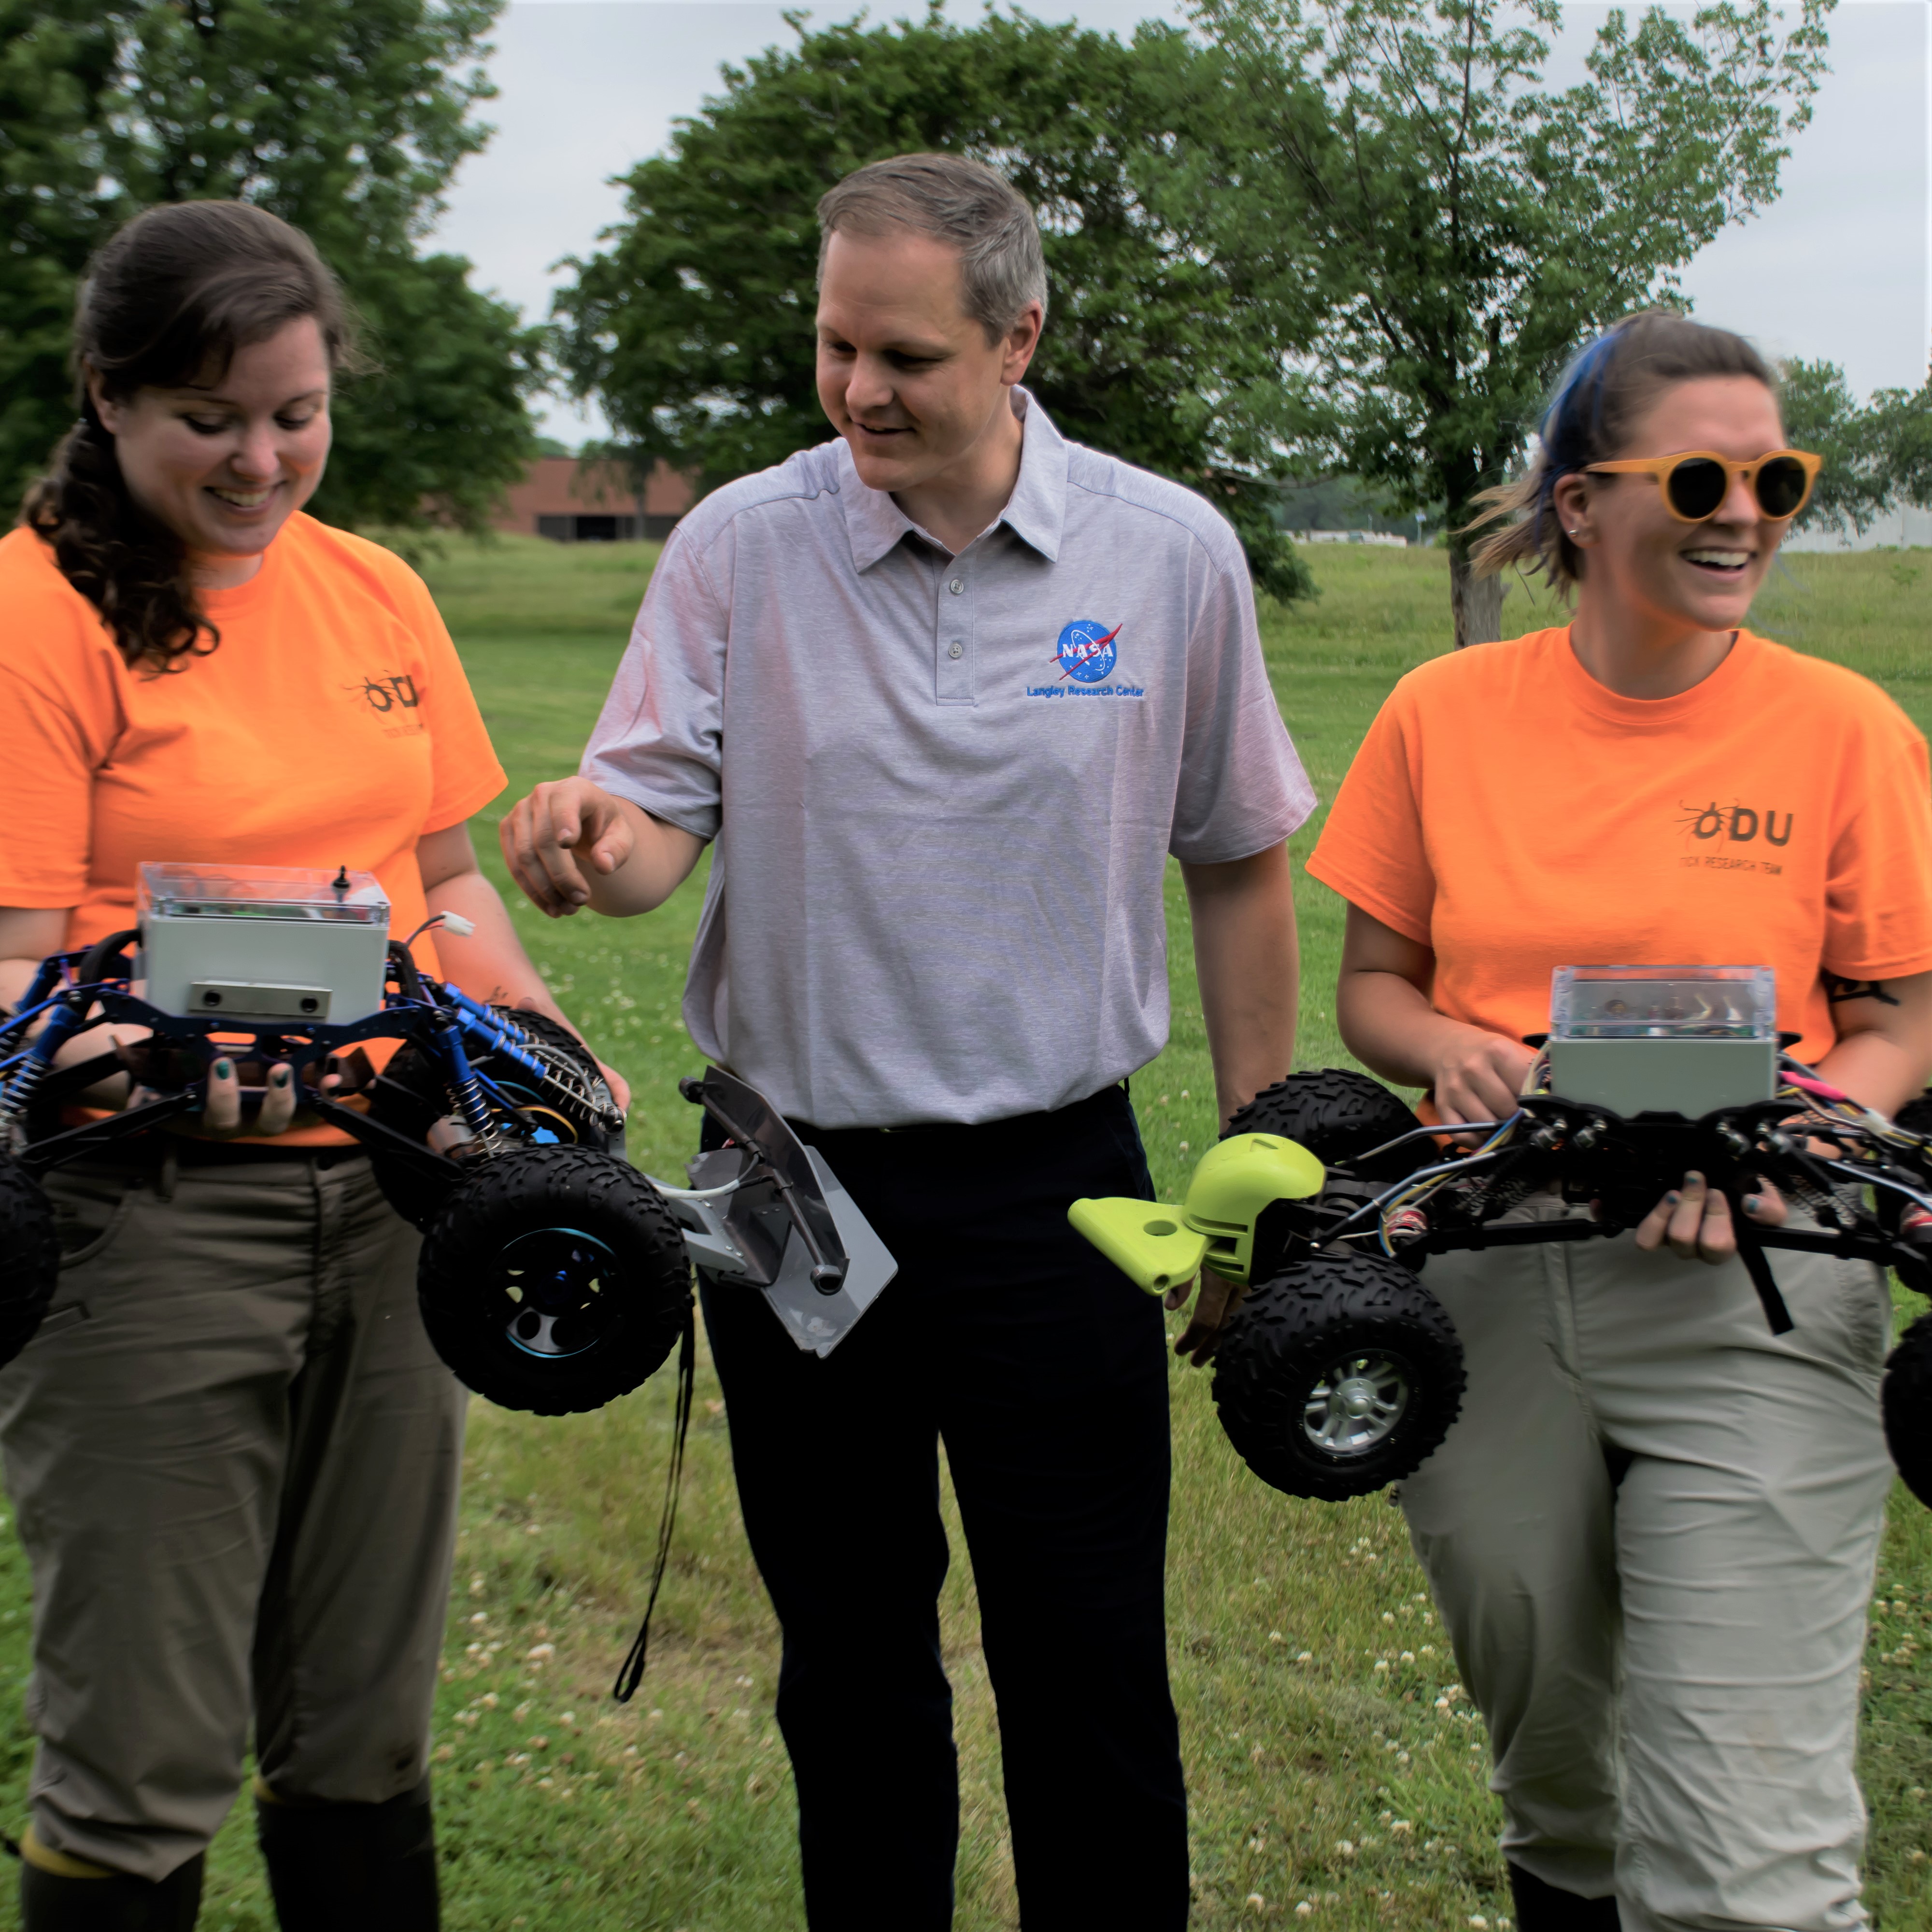 Old Dominion University students Alexis White, left, and Amanda DeVleeschower, right, are with NASA Langley environmental protection specialist Peter Van Dyke are pictured with 'TickBot' prototypes.